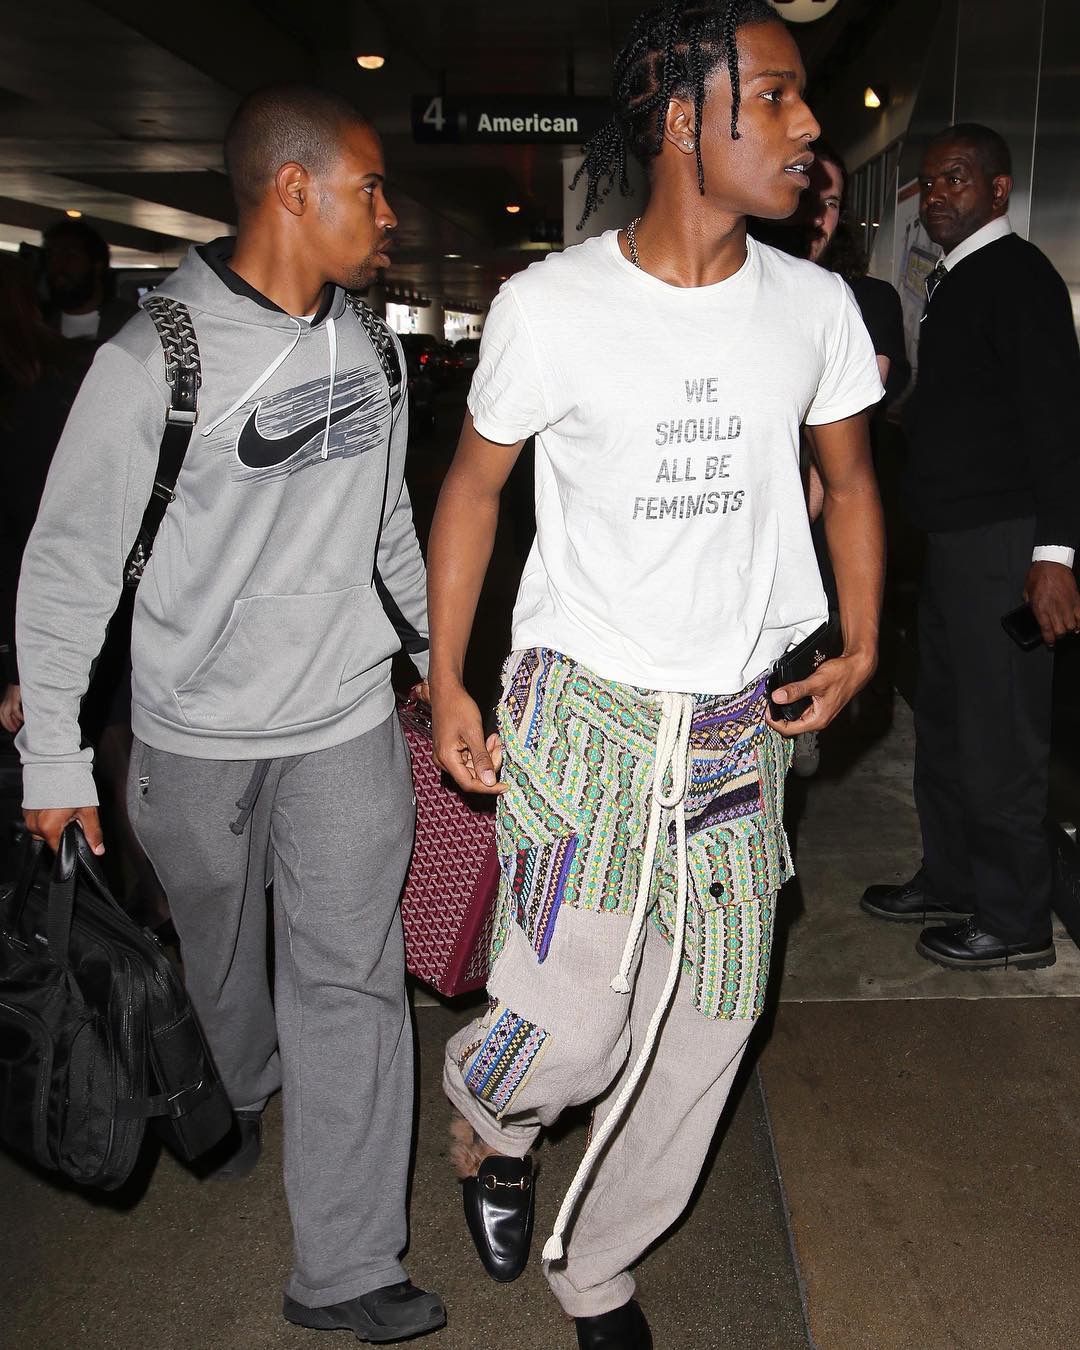 SPOTTED: A$AP Rocky in Dior, Loewe and Gucci Slippers at LAX